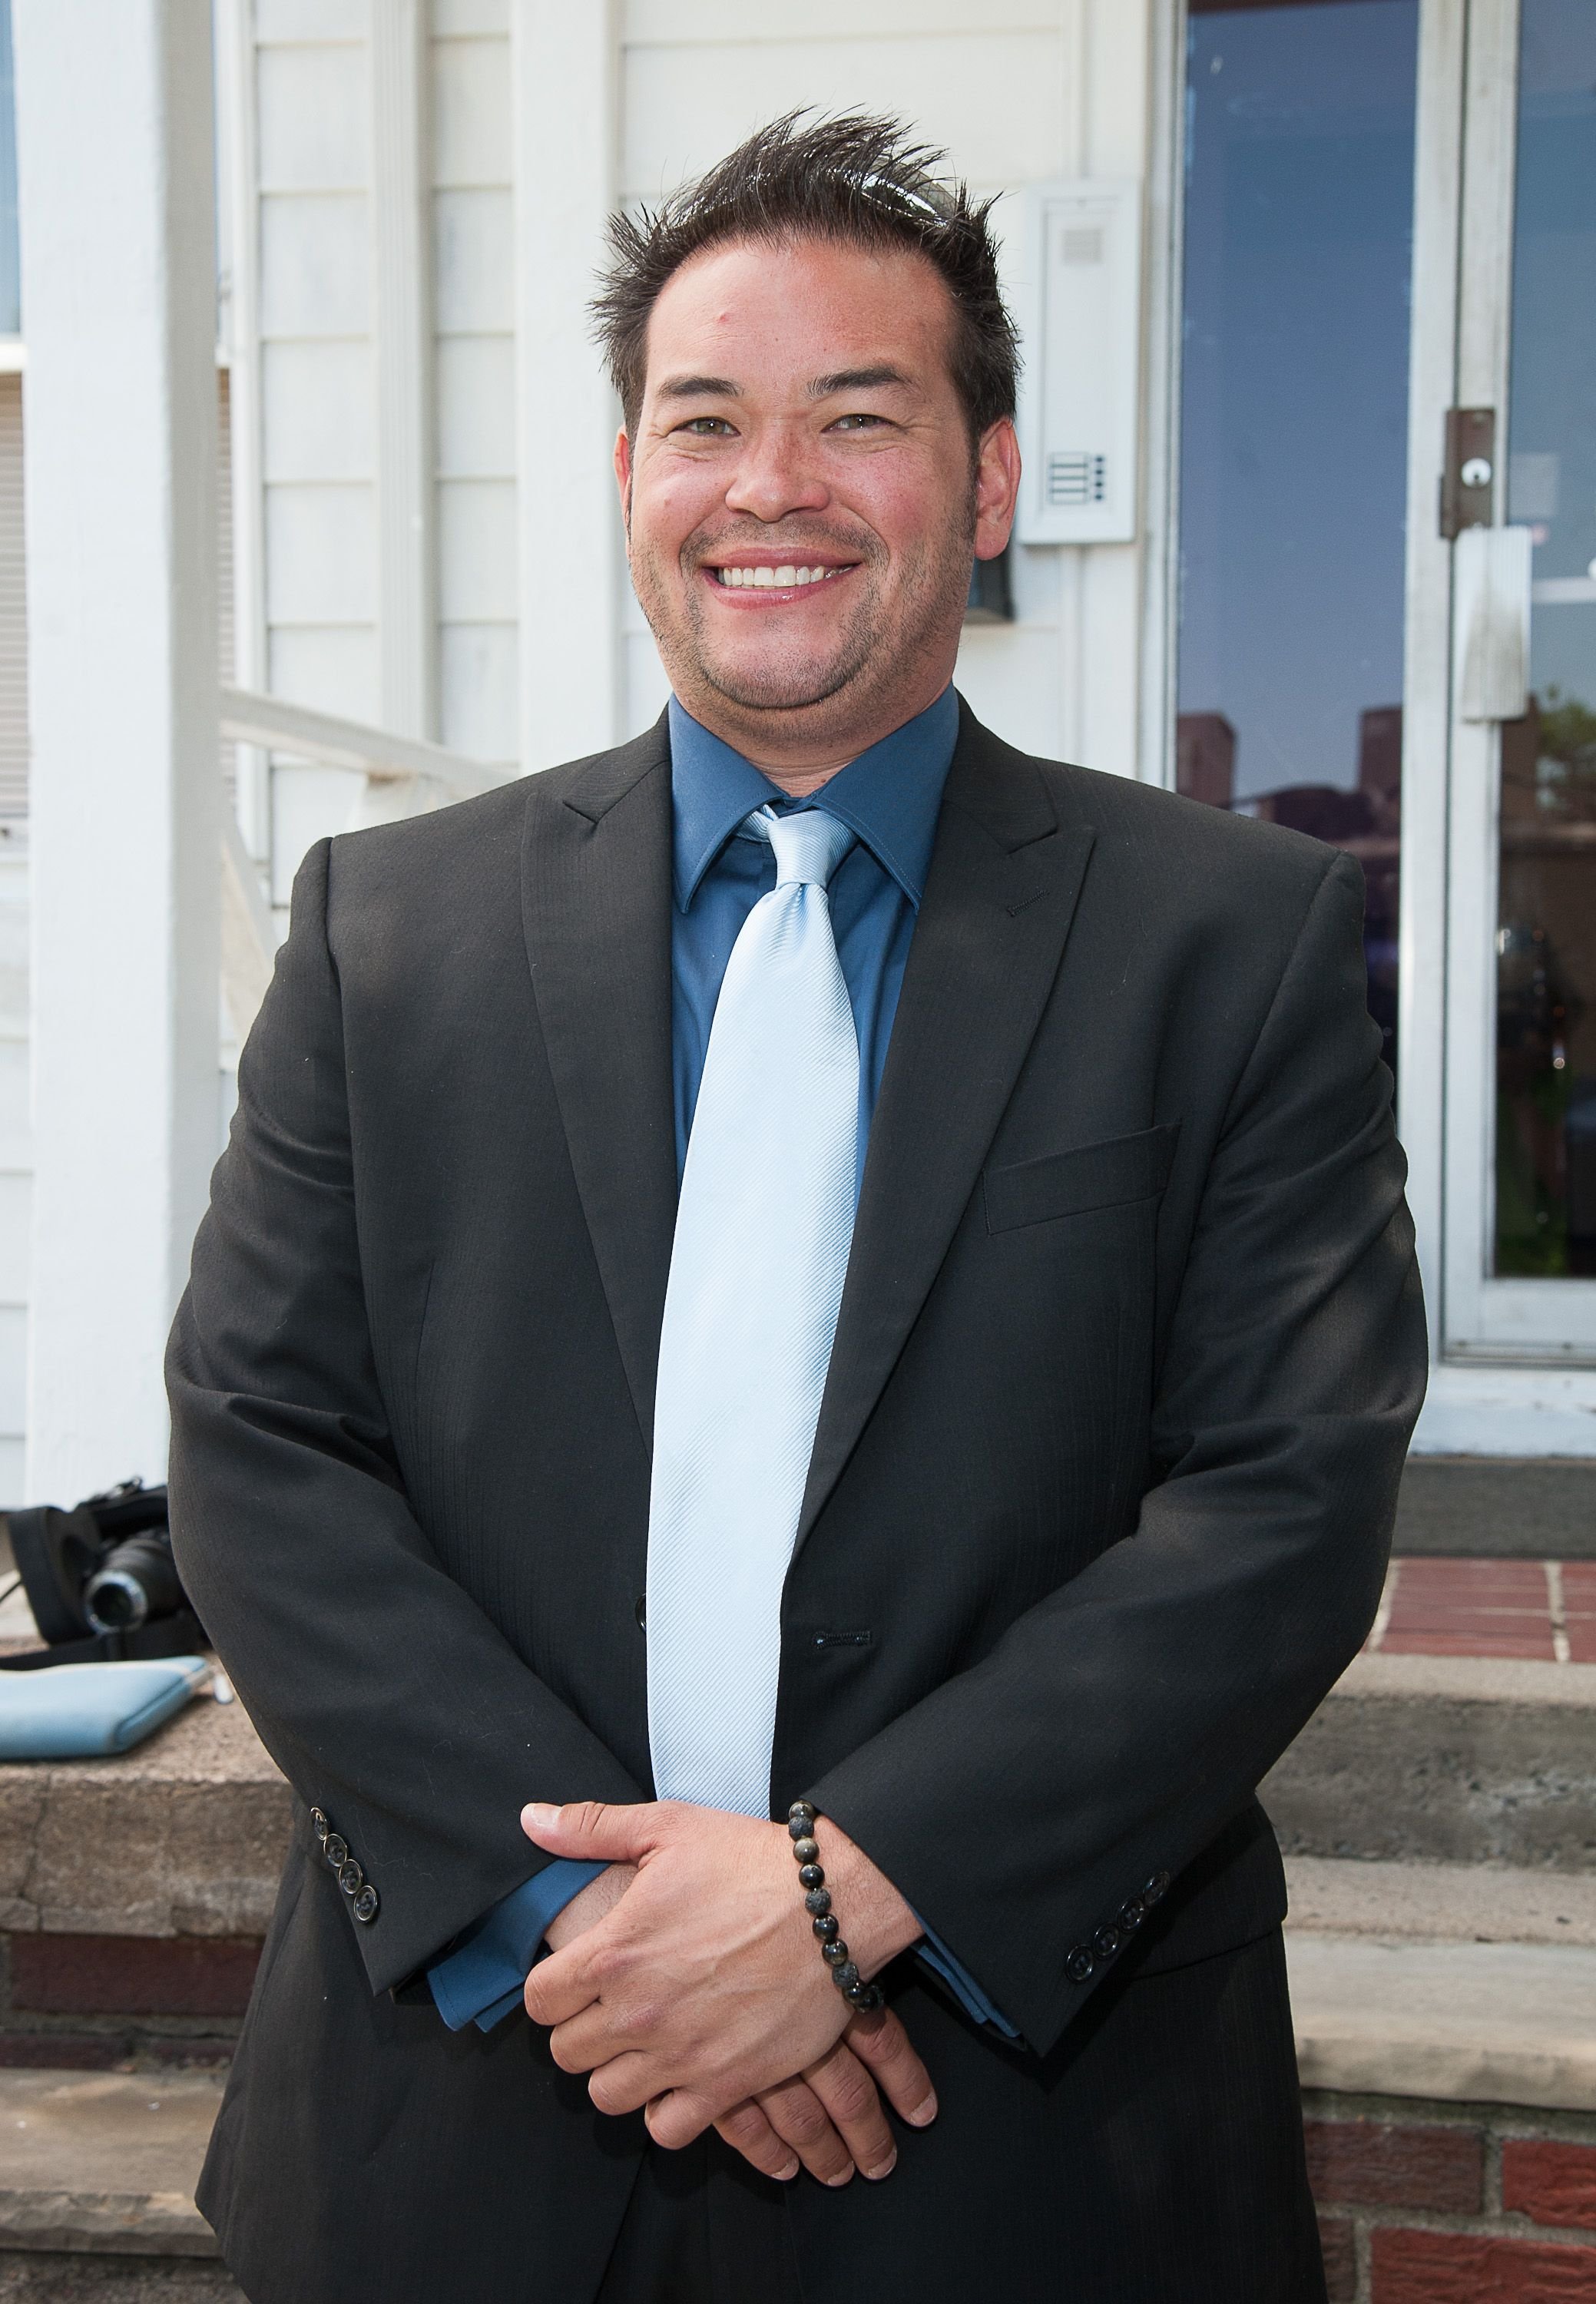 Jon Gosselin during a press conference on Tax Deductible Marriage Counseling at Bergen Marriage Counseling & Psychotherapy on June 27, 2012 | Photo: Getty Images